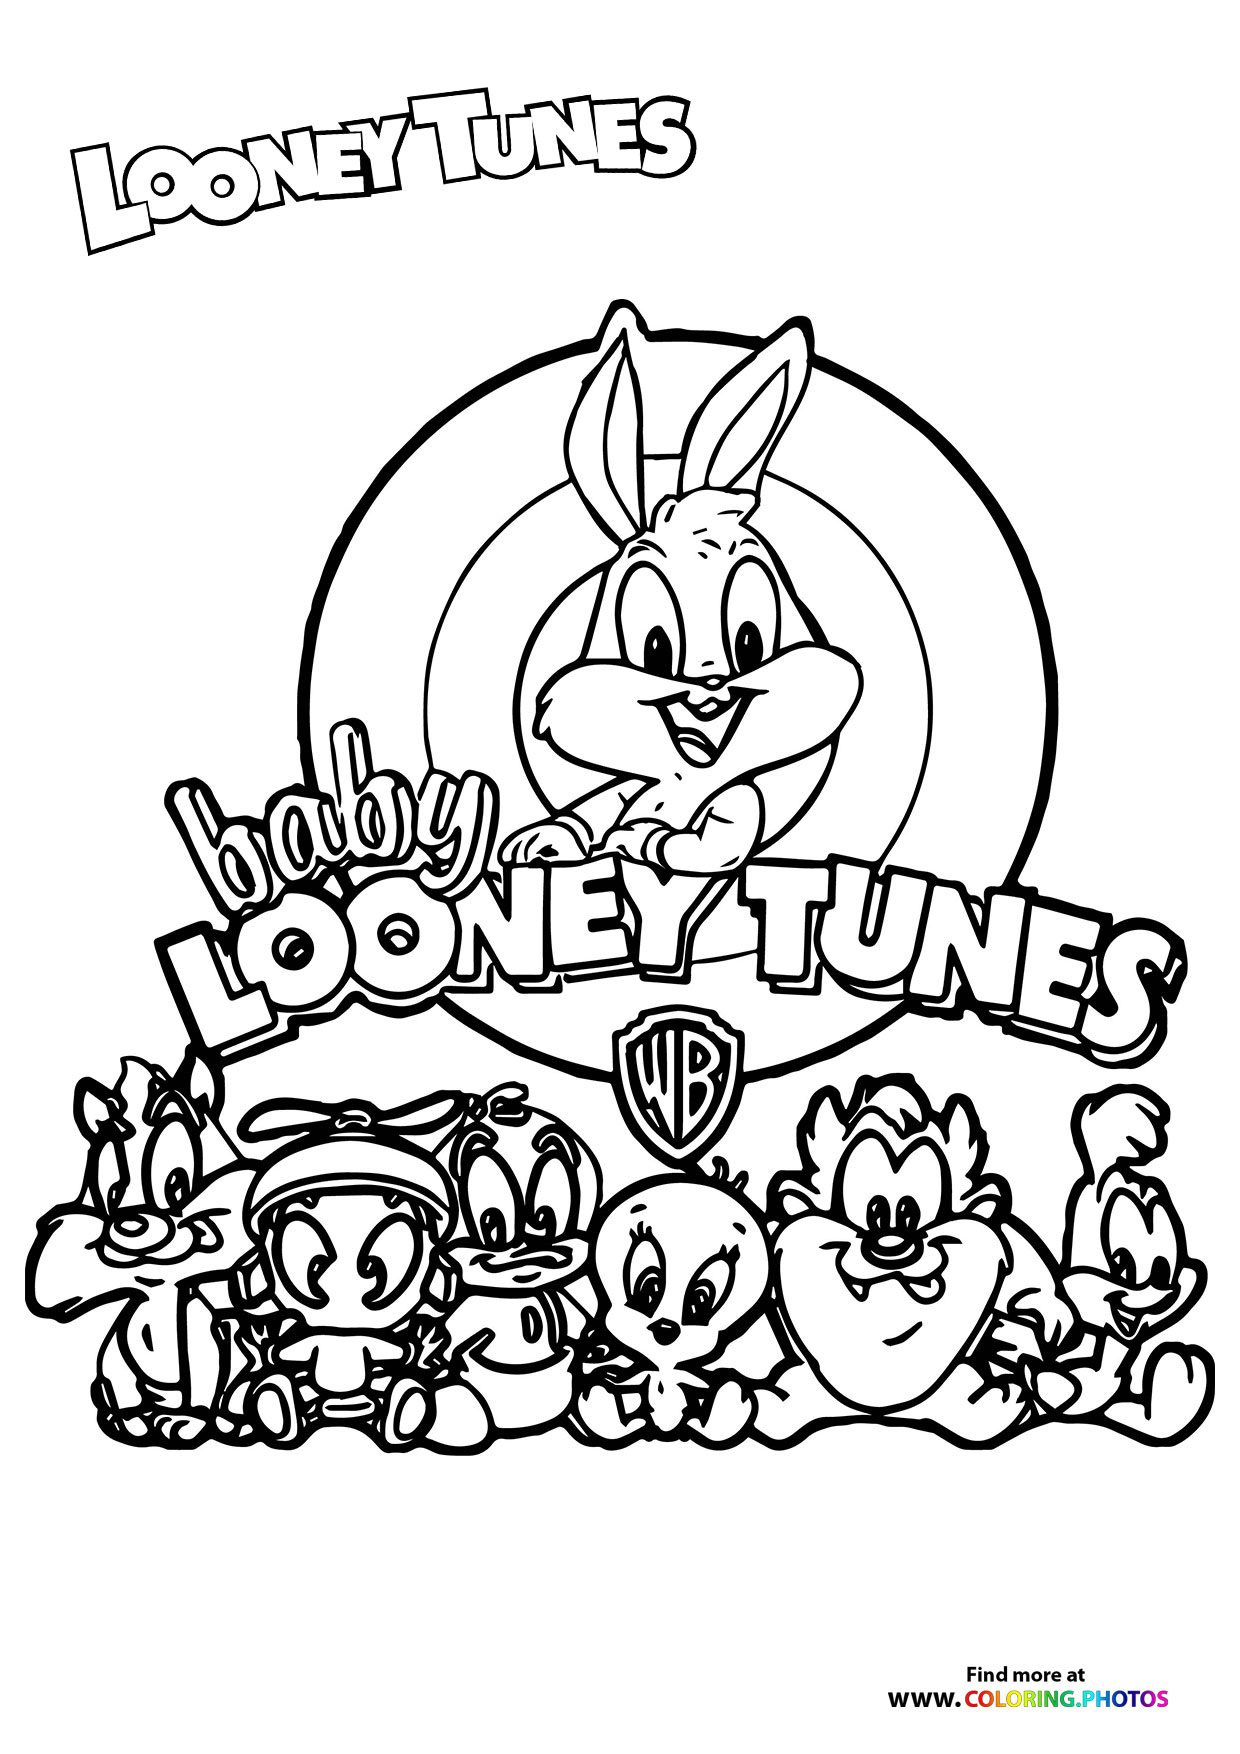 Looney Tunes characters - Coloring Pages for kids